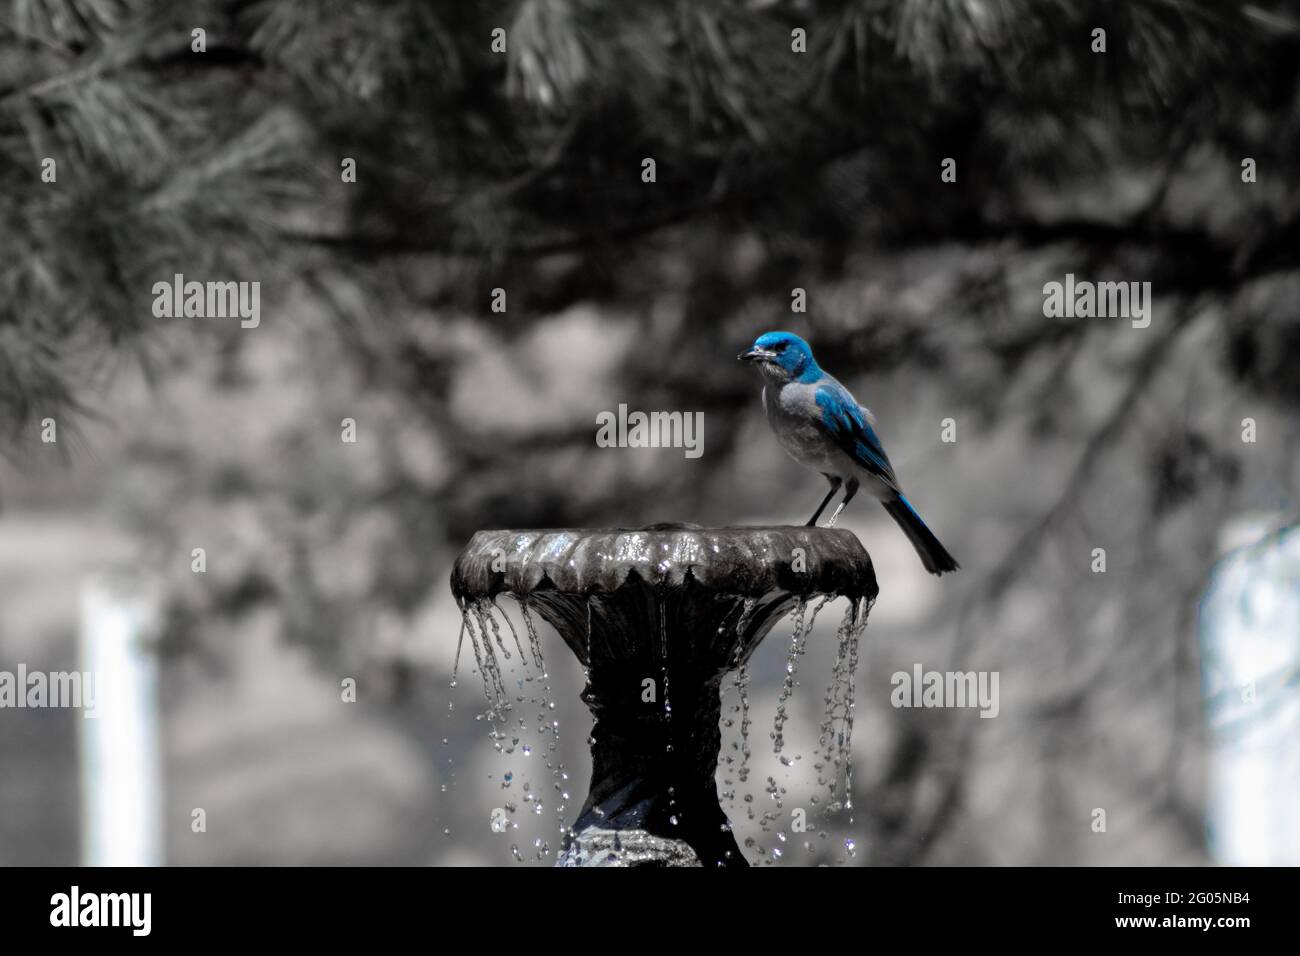 Closeup shot of a blue steller's jay perched on a fountain Stock Photo